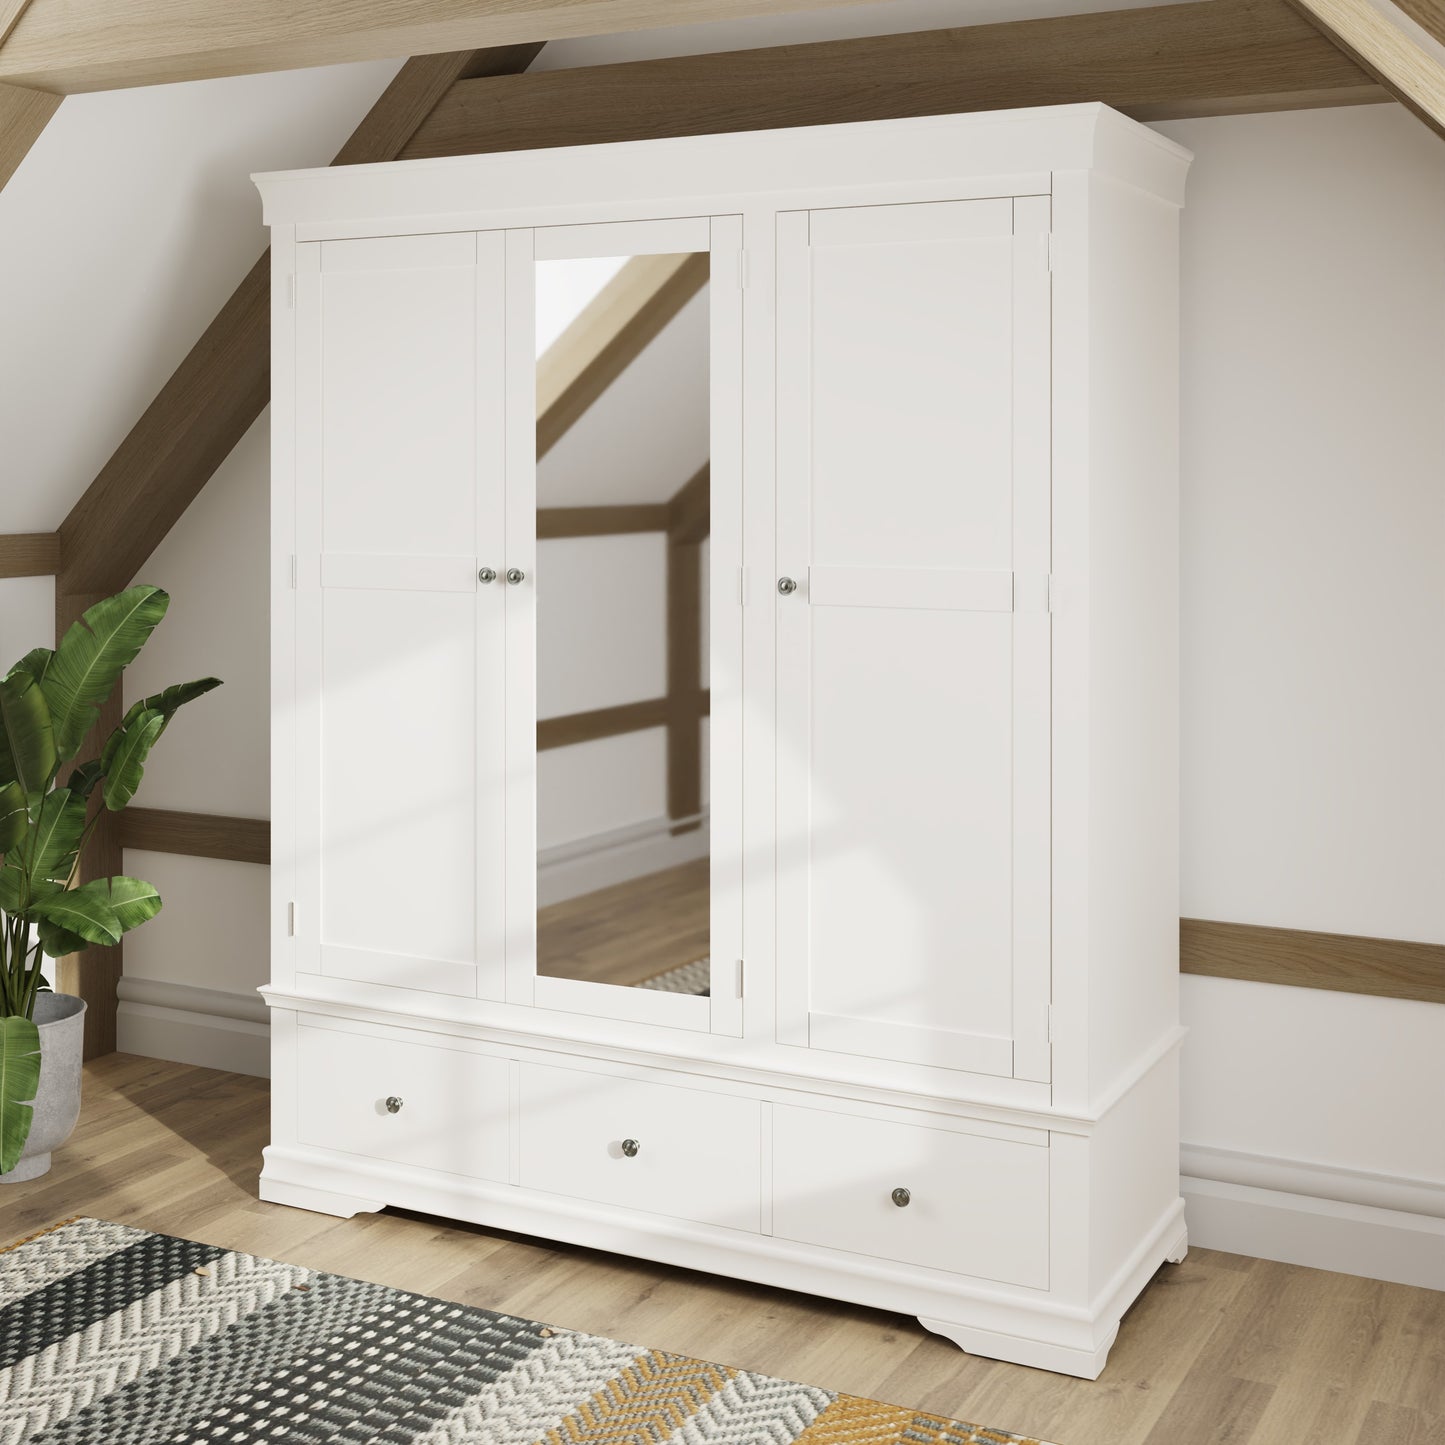 Toulouse White Wardrobe - 3 Door With Drawers